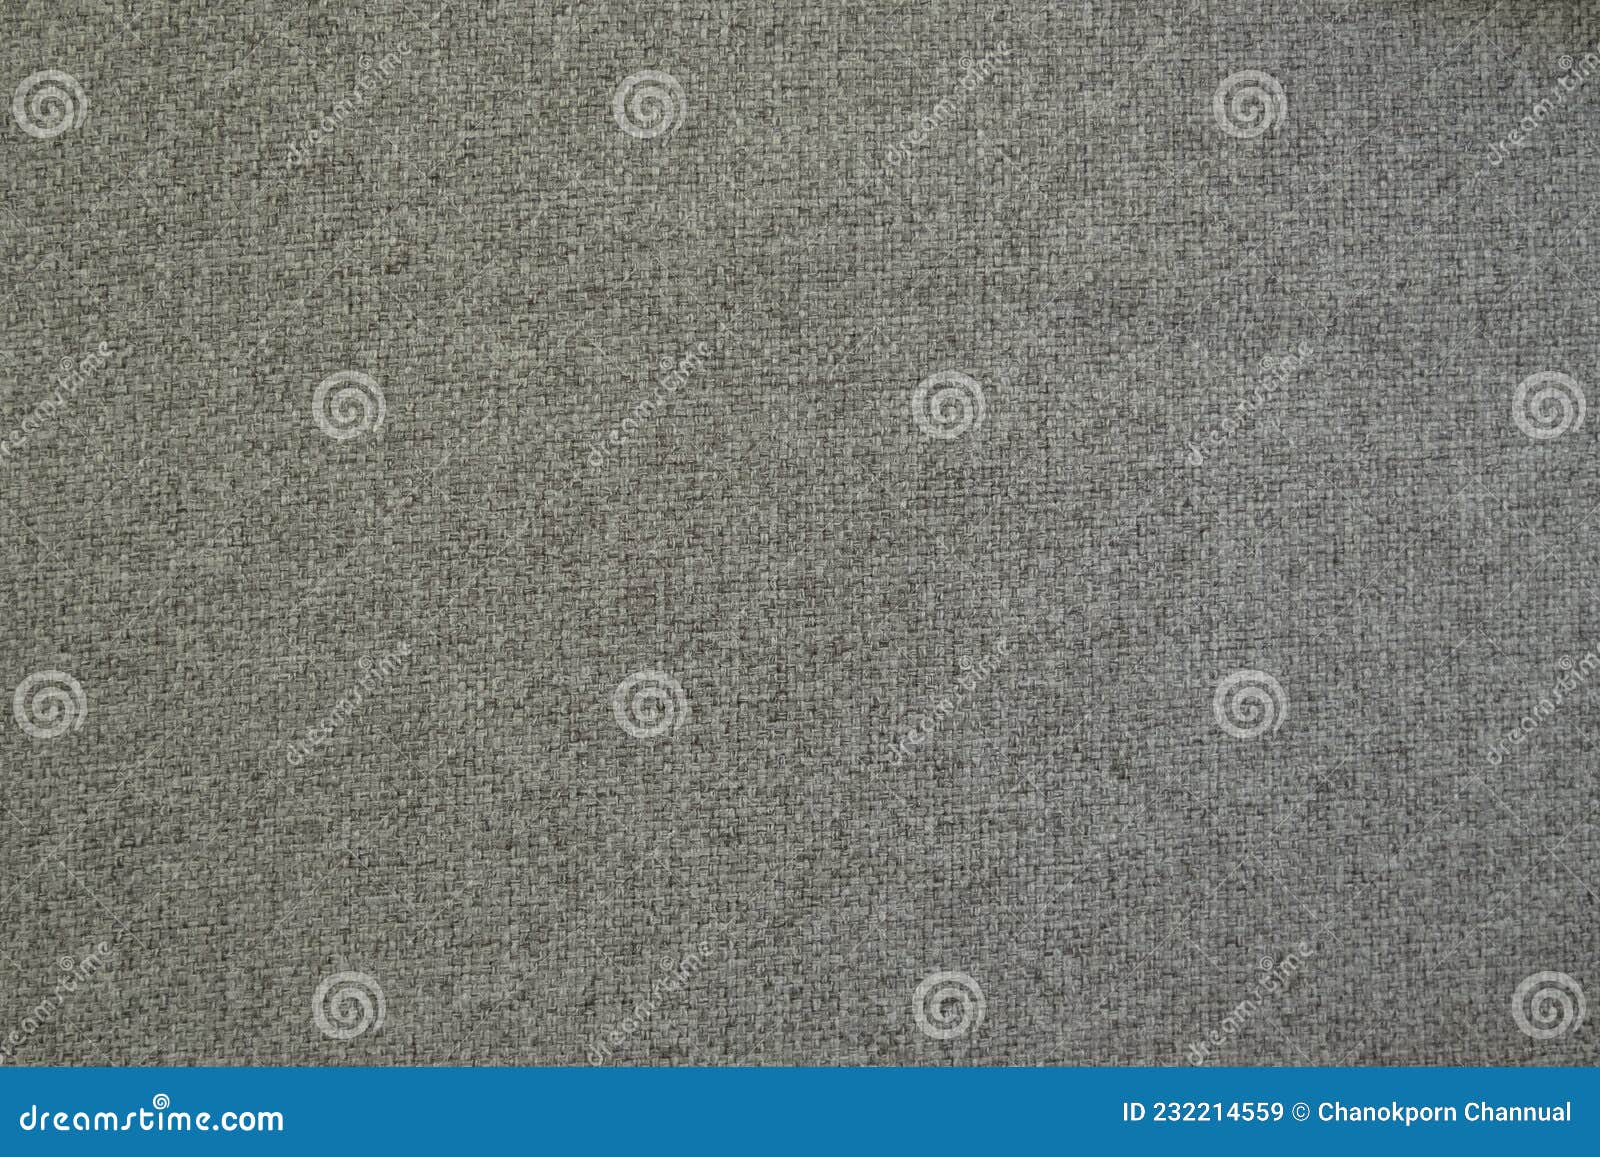 Grey Gray Color Fabric Detail Carpet or Cardboard Texture Background ...